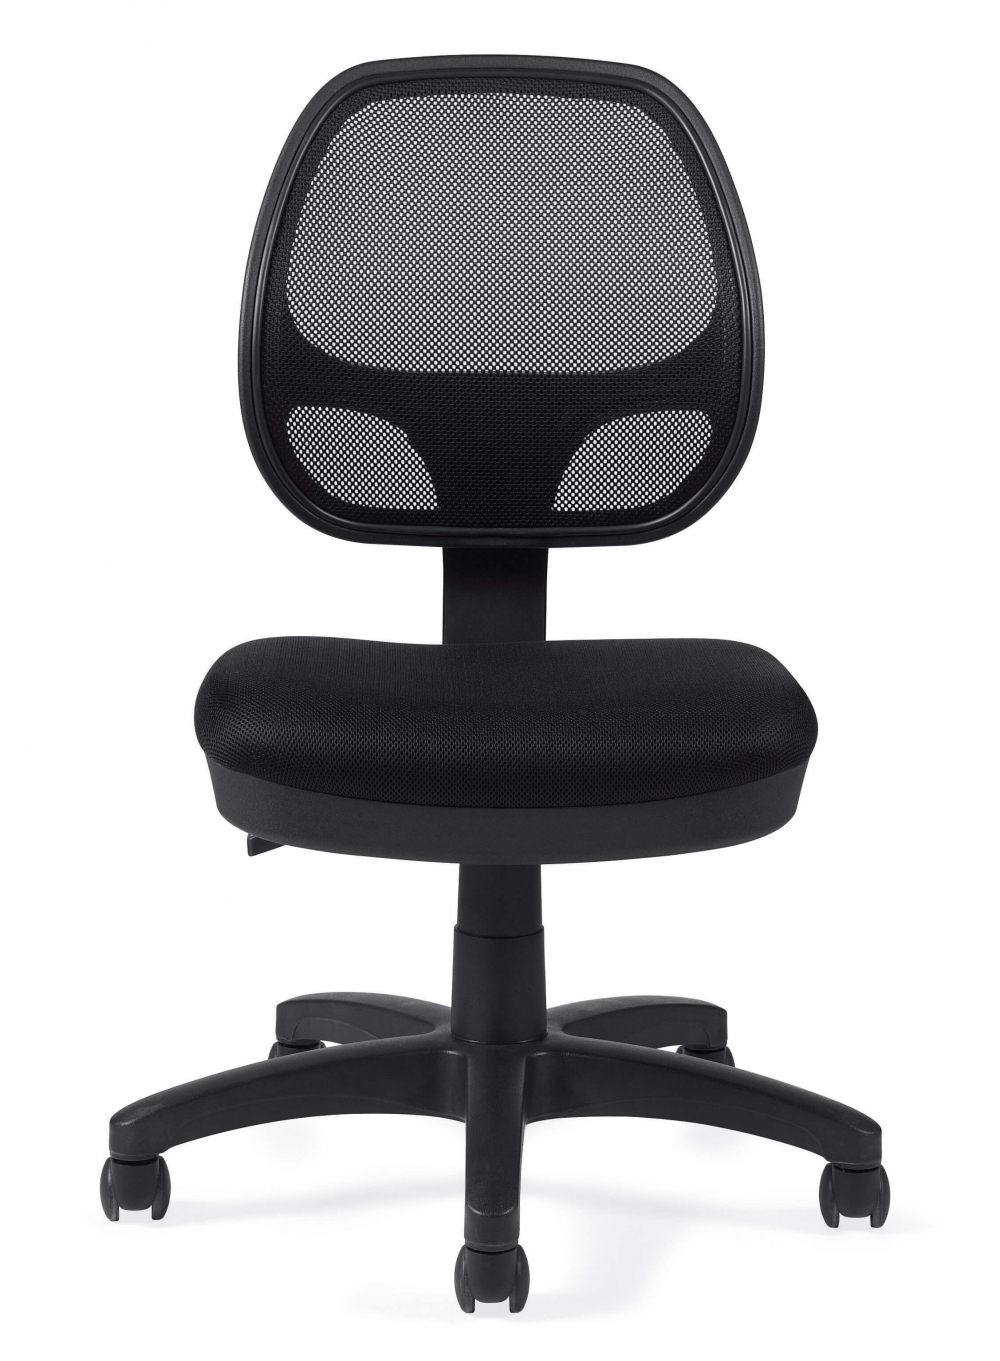 Affordable office chairs front view